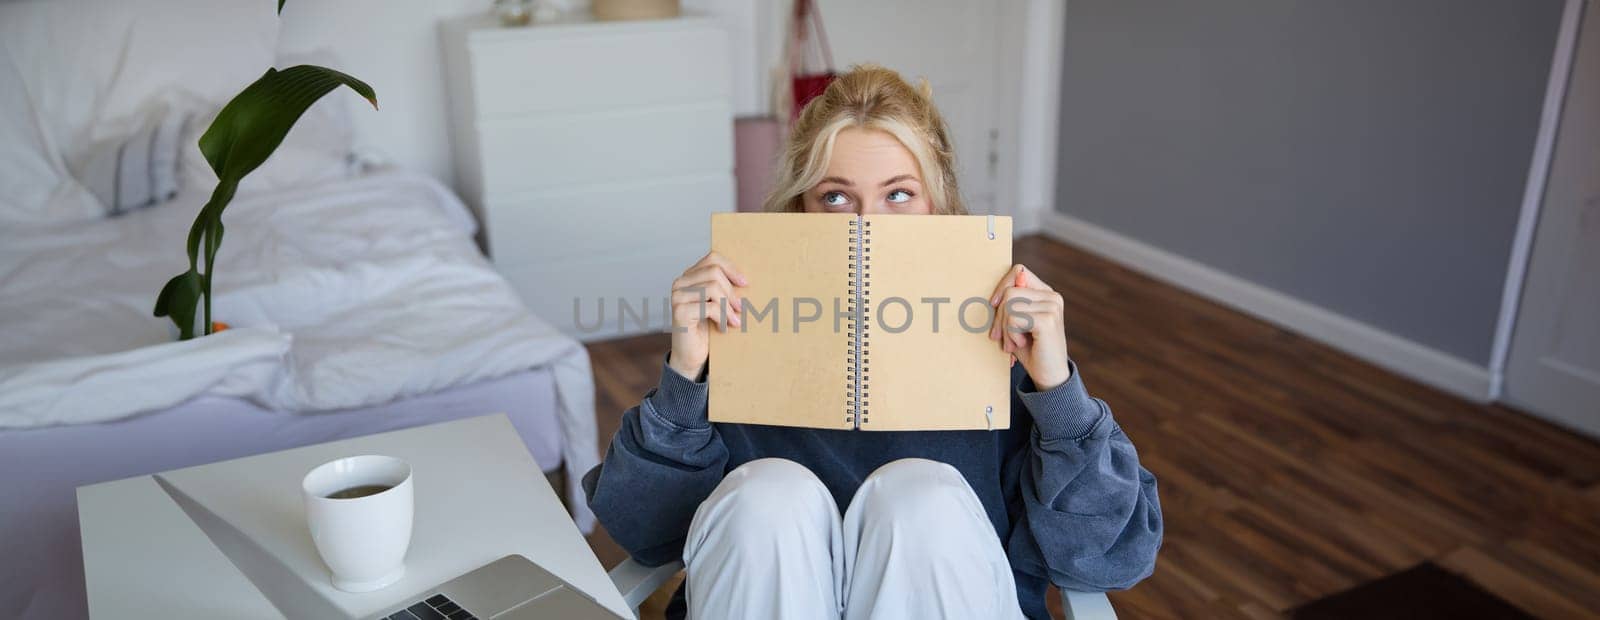 Portrait of cute blond woman, sits in front of digital camera and laptop in her room, covers face with notebook journal, records video of herself for lifestyle vlog.